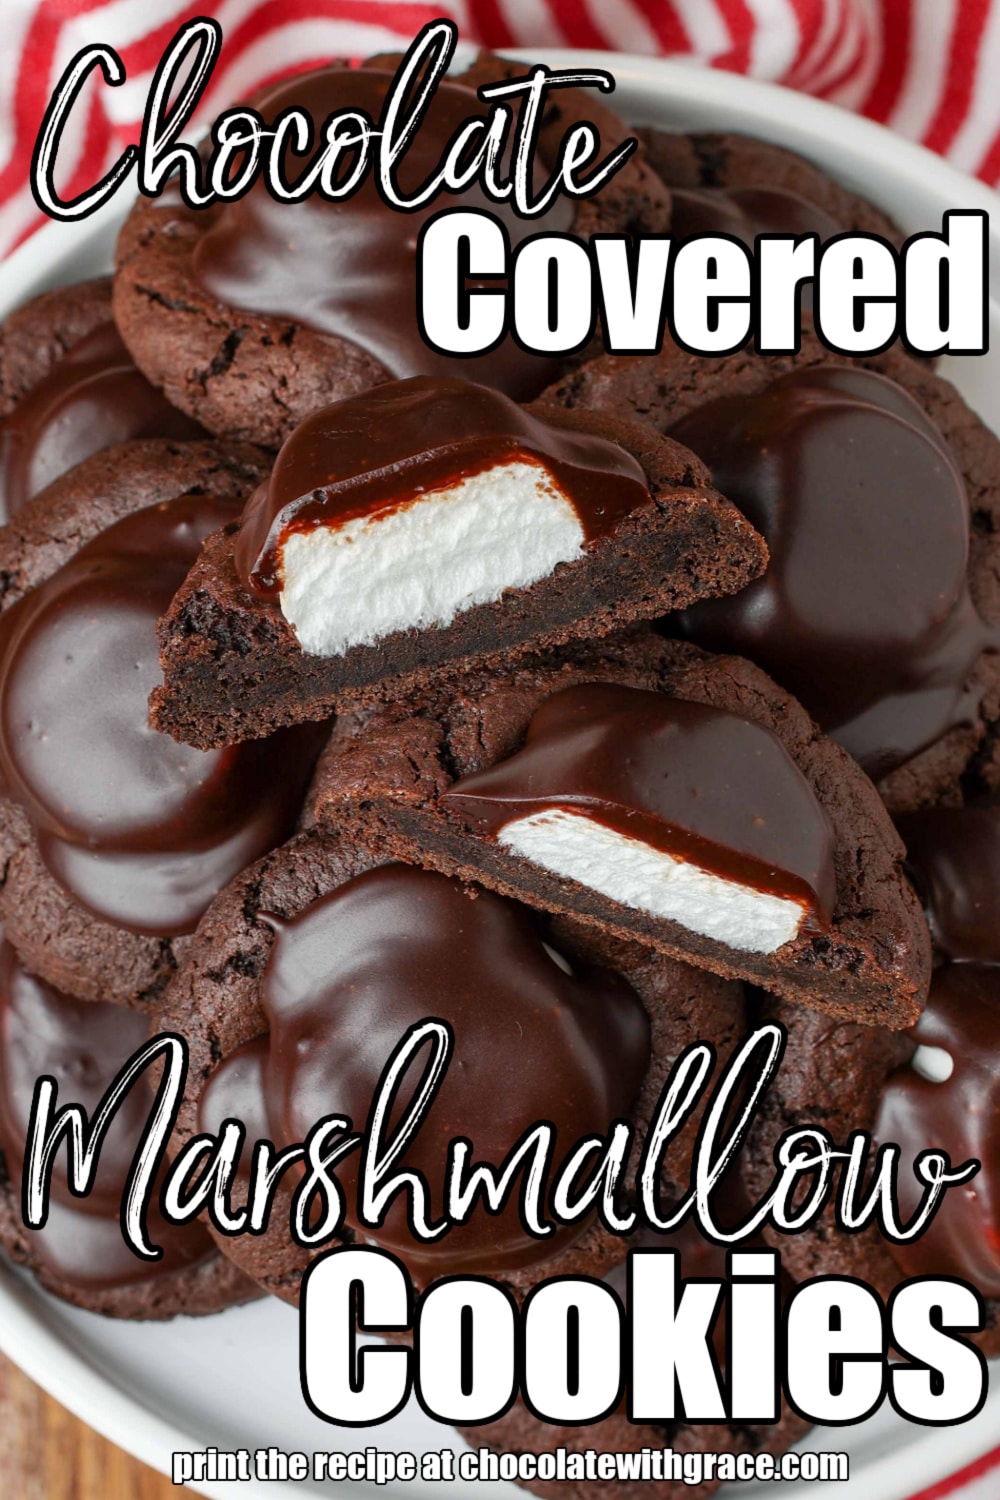 https://chocolatewithgrace.com/wp-content/uploads/2023/02/Chocolate-Covered-Marshmallow-Cookies-CWG-pin-photo.jpg